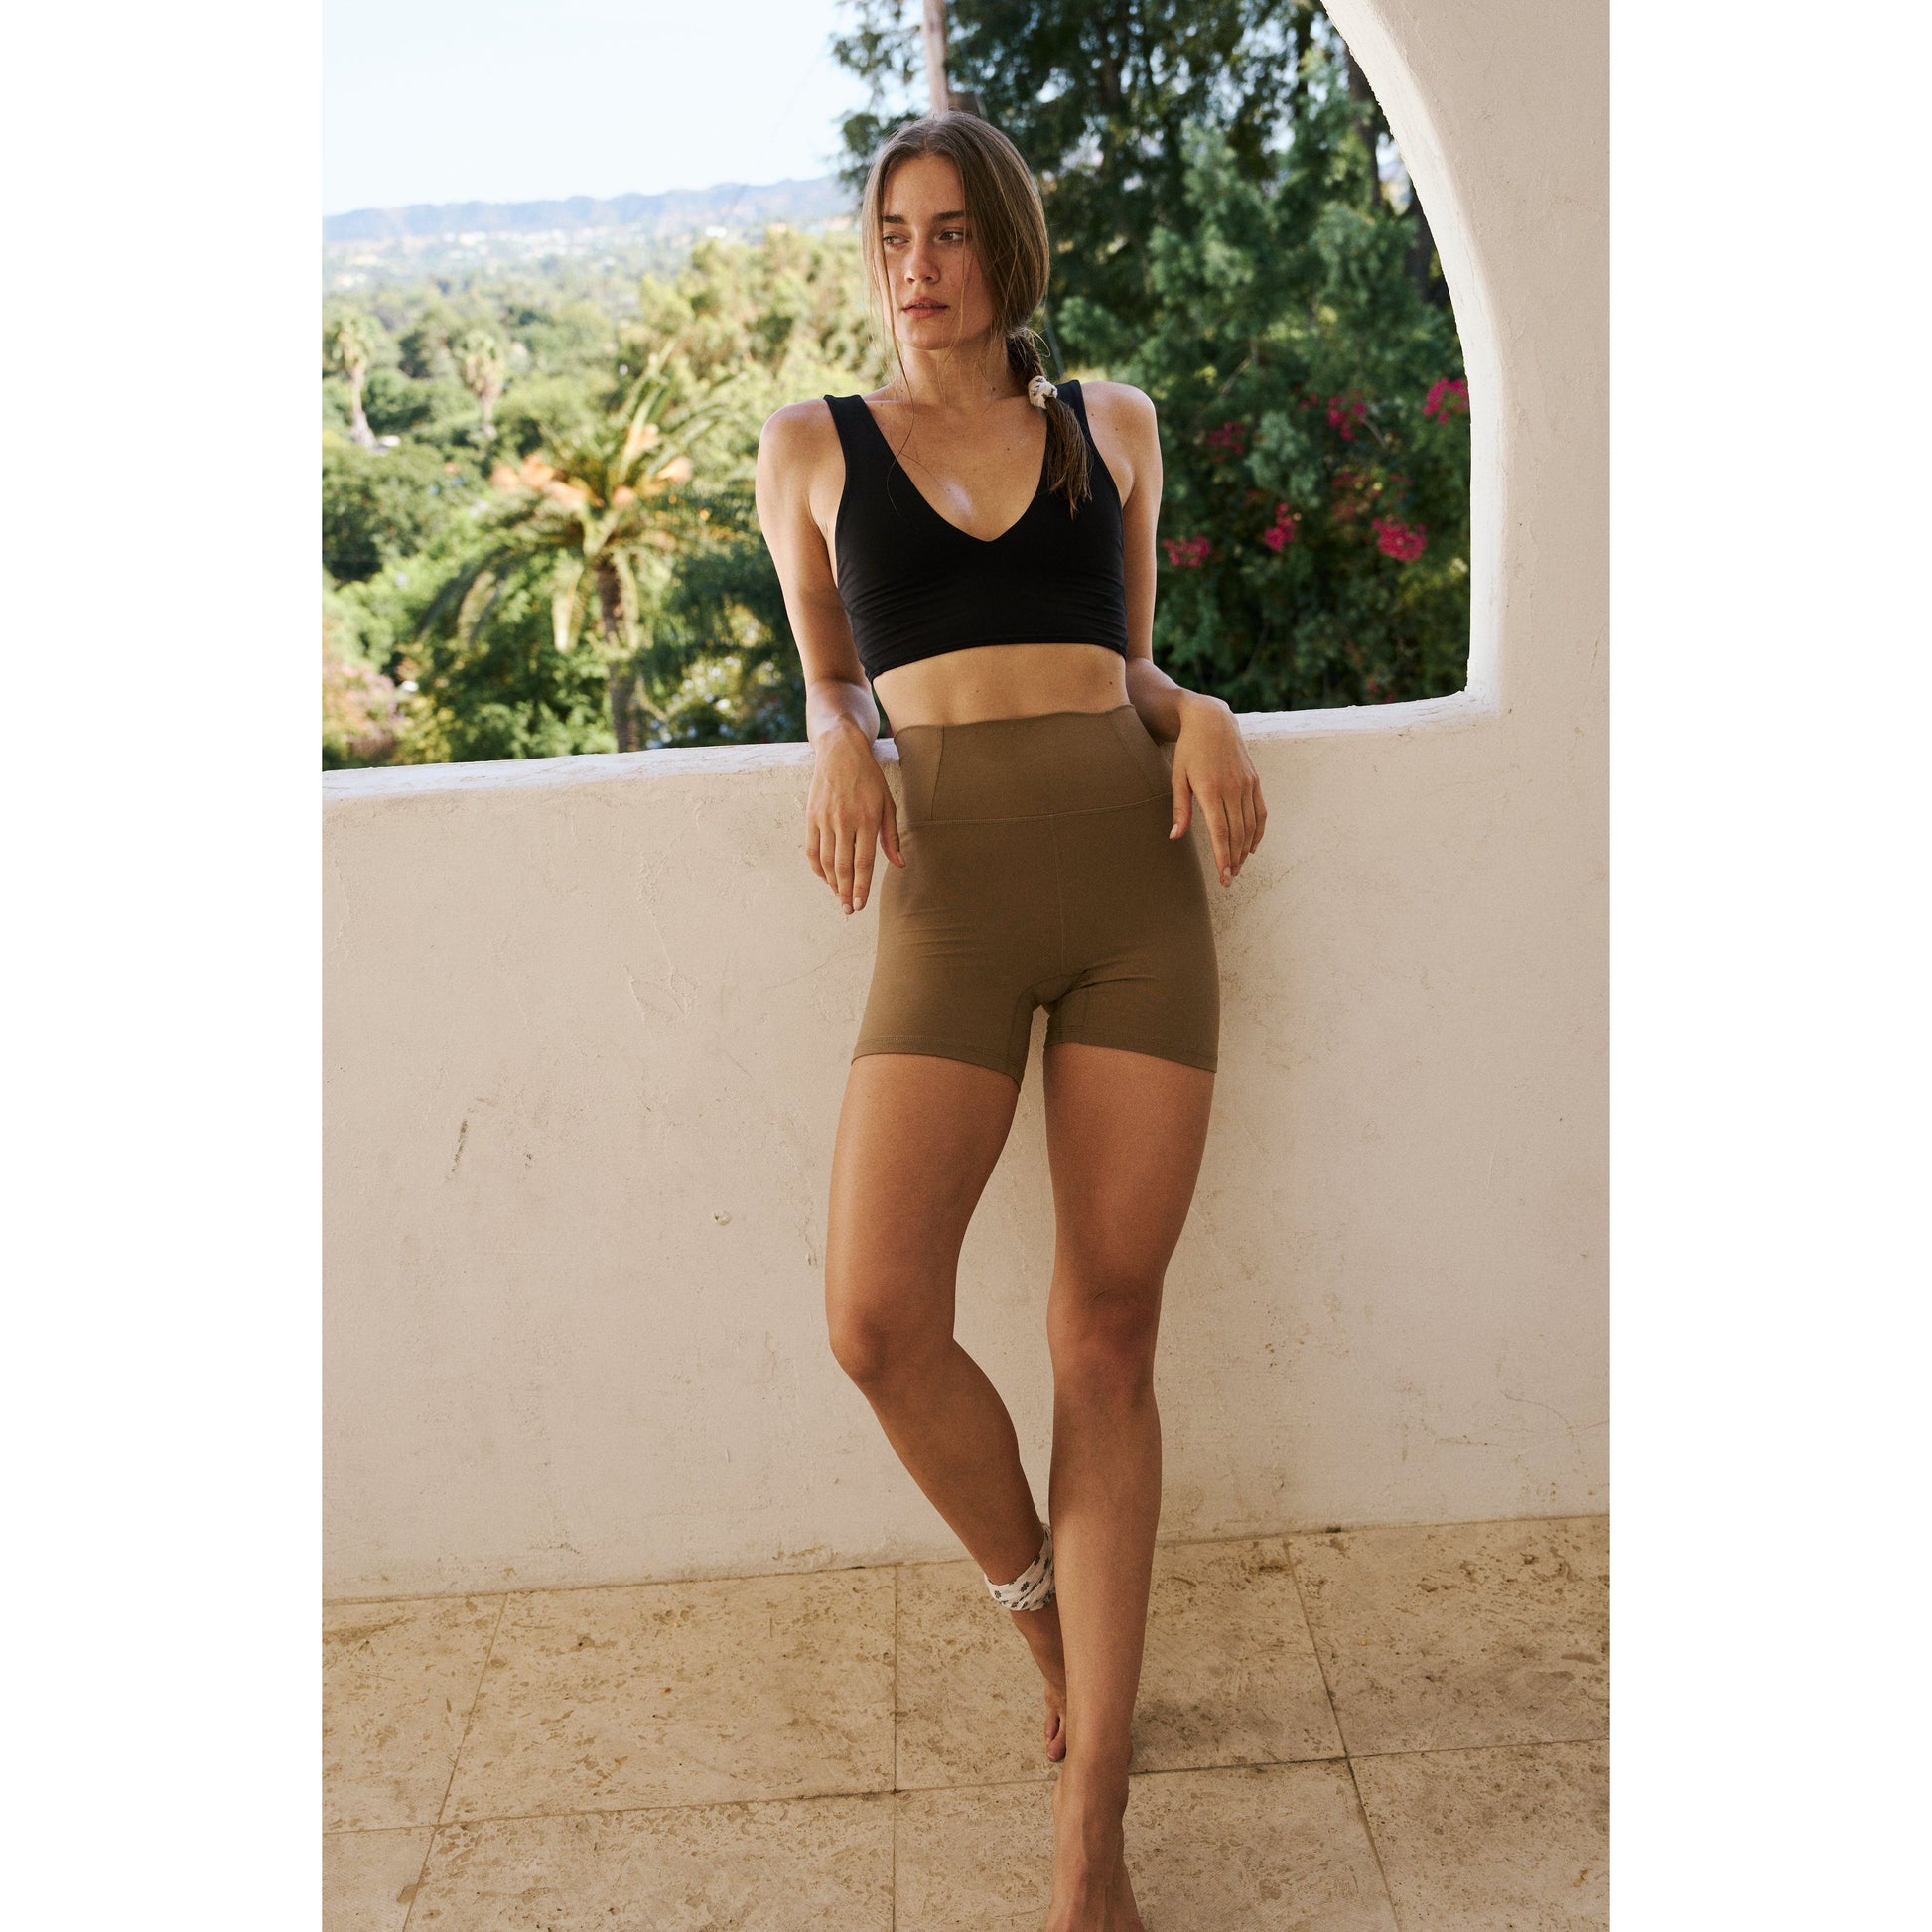 A woman in a black sports bra and Free People Movement's Moonrock Never Better Bike Shorts stands confidently on a balcony with lush greenery in the background.